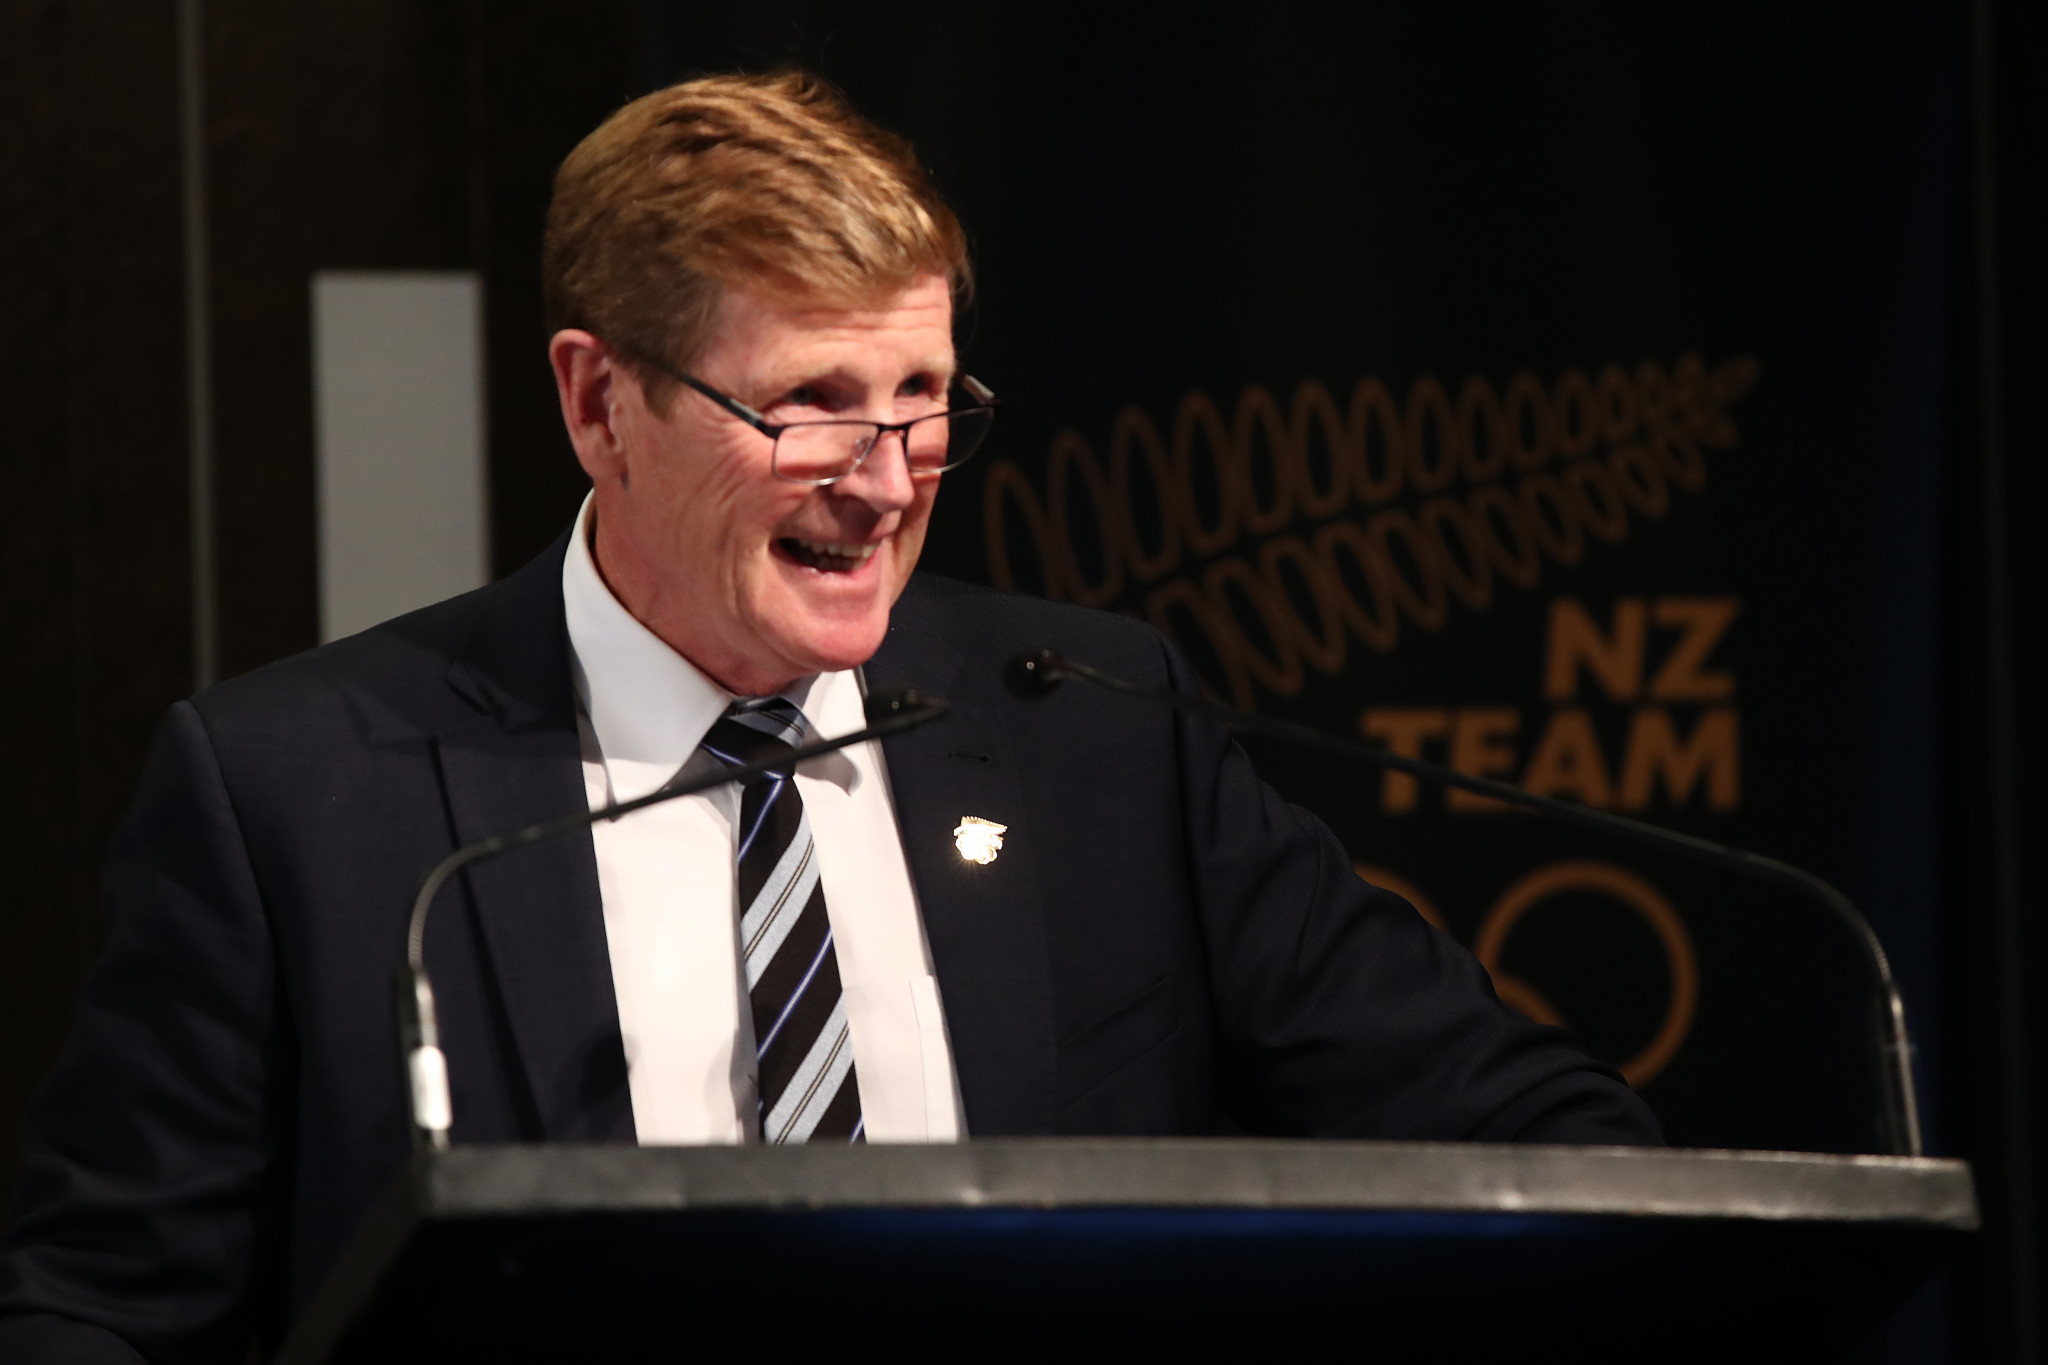 New Zealand Olympic Committee President Mike Stanley has acknowledged a successful year for the organisation during the presentation of its 2018 annual report to member federations in Auckland today ©Getty Images